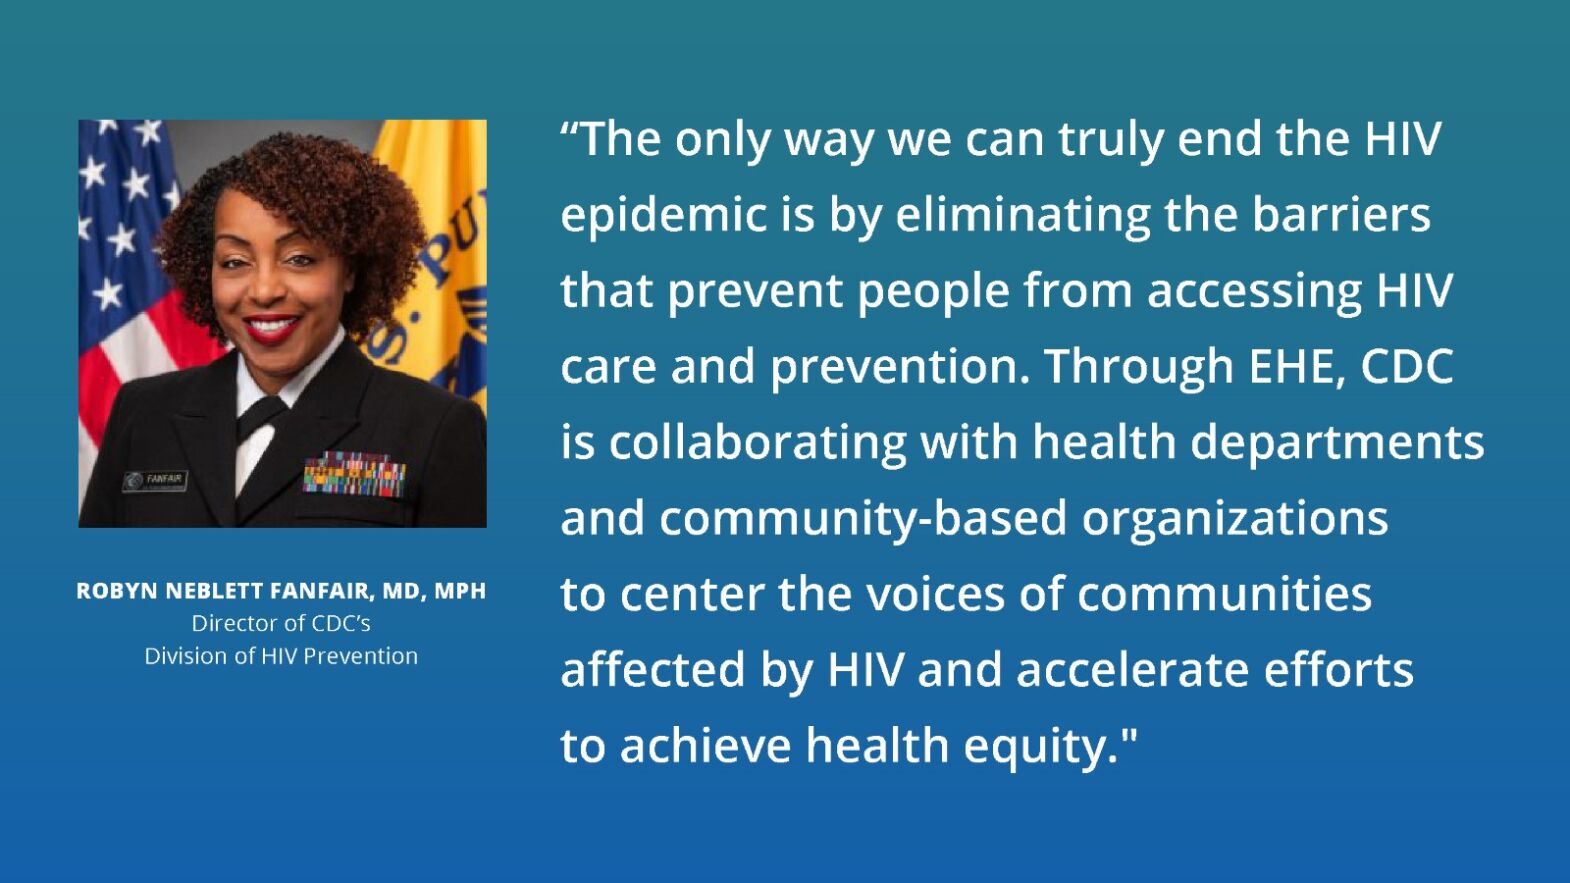 Quote from Robyn Neblett Fanfair, MD, MPH, Director of CDC’s Division of HIV Prevention, stating "The only way we can truly end the HIV epidemic is by eliminating the barriers that prevent people from accessing HIV care and prevention. Through EHE, CDC is collaborating with health departments and community-based organizations to center the voices of communities affected by HIV and accelerate efforts to achieve health equity."